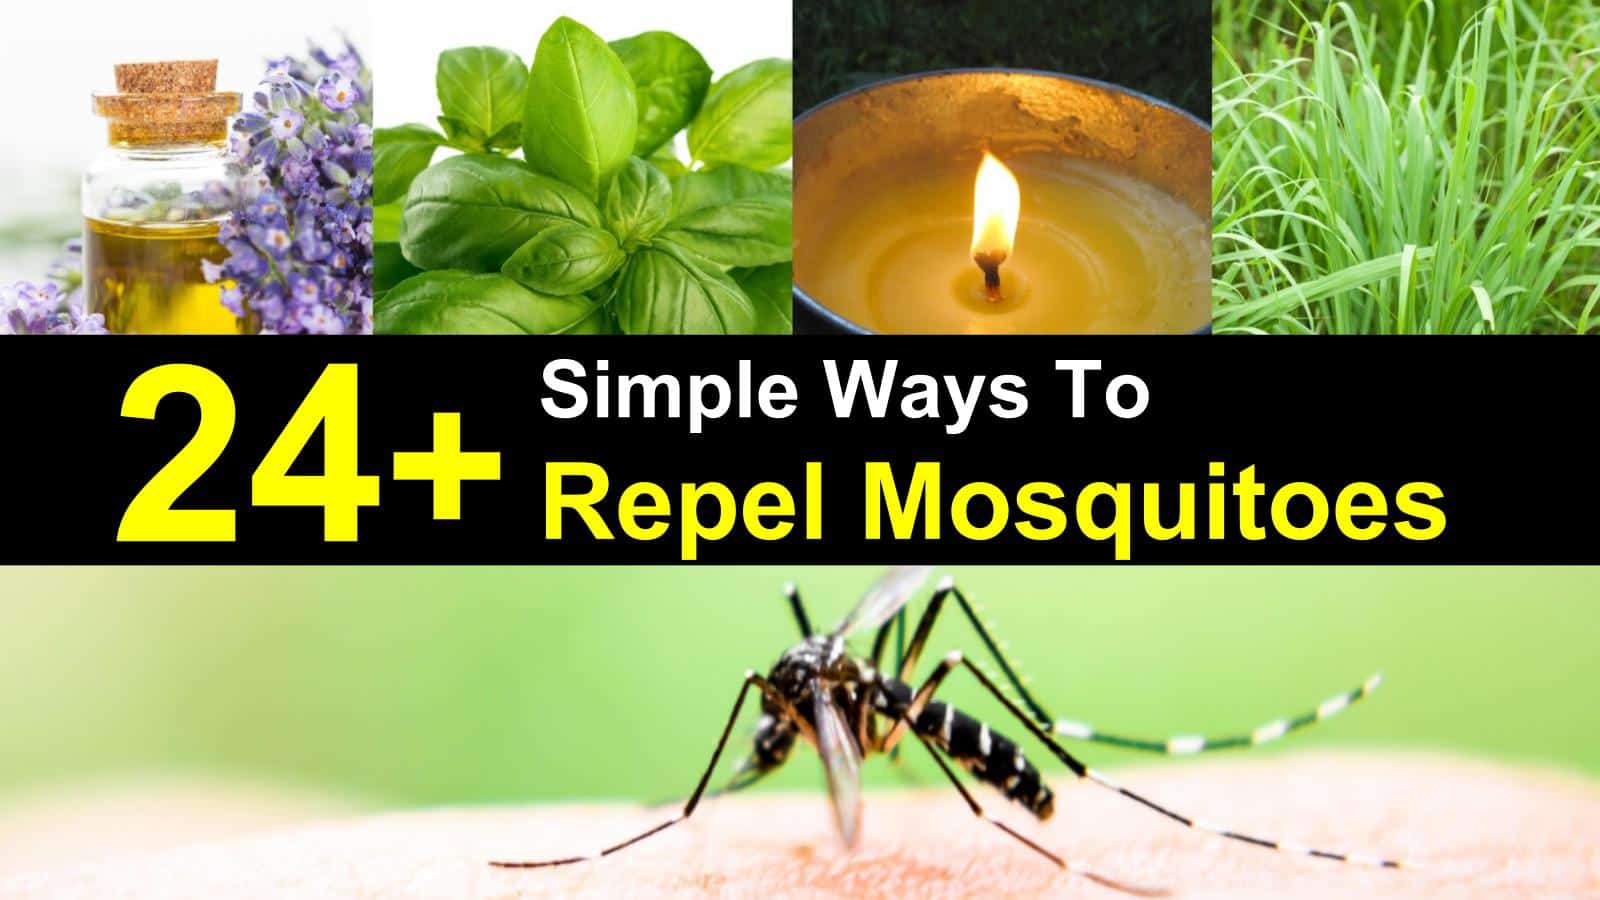 24 Simple Ways To Repel Mosquitoes, How To Prevent Mosquito Outdoor